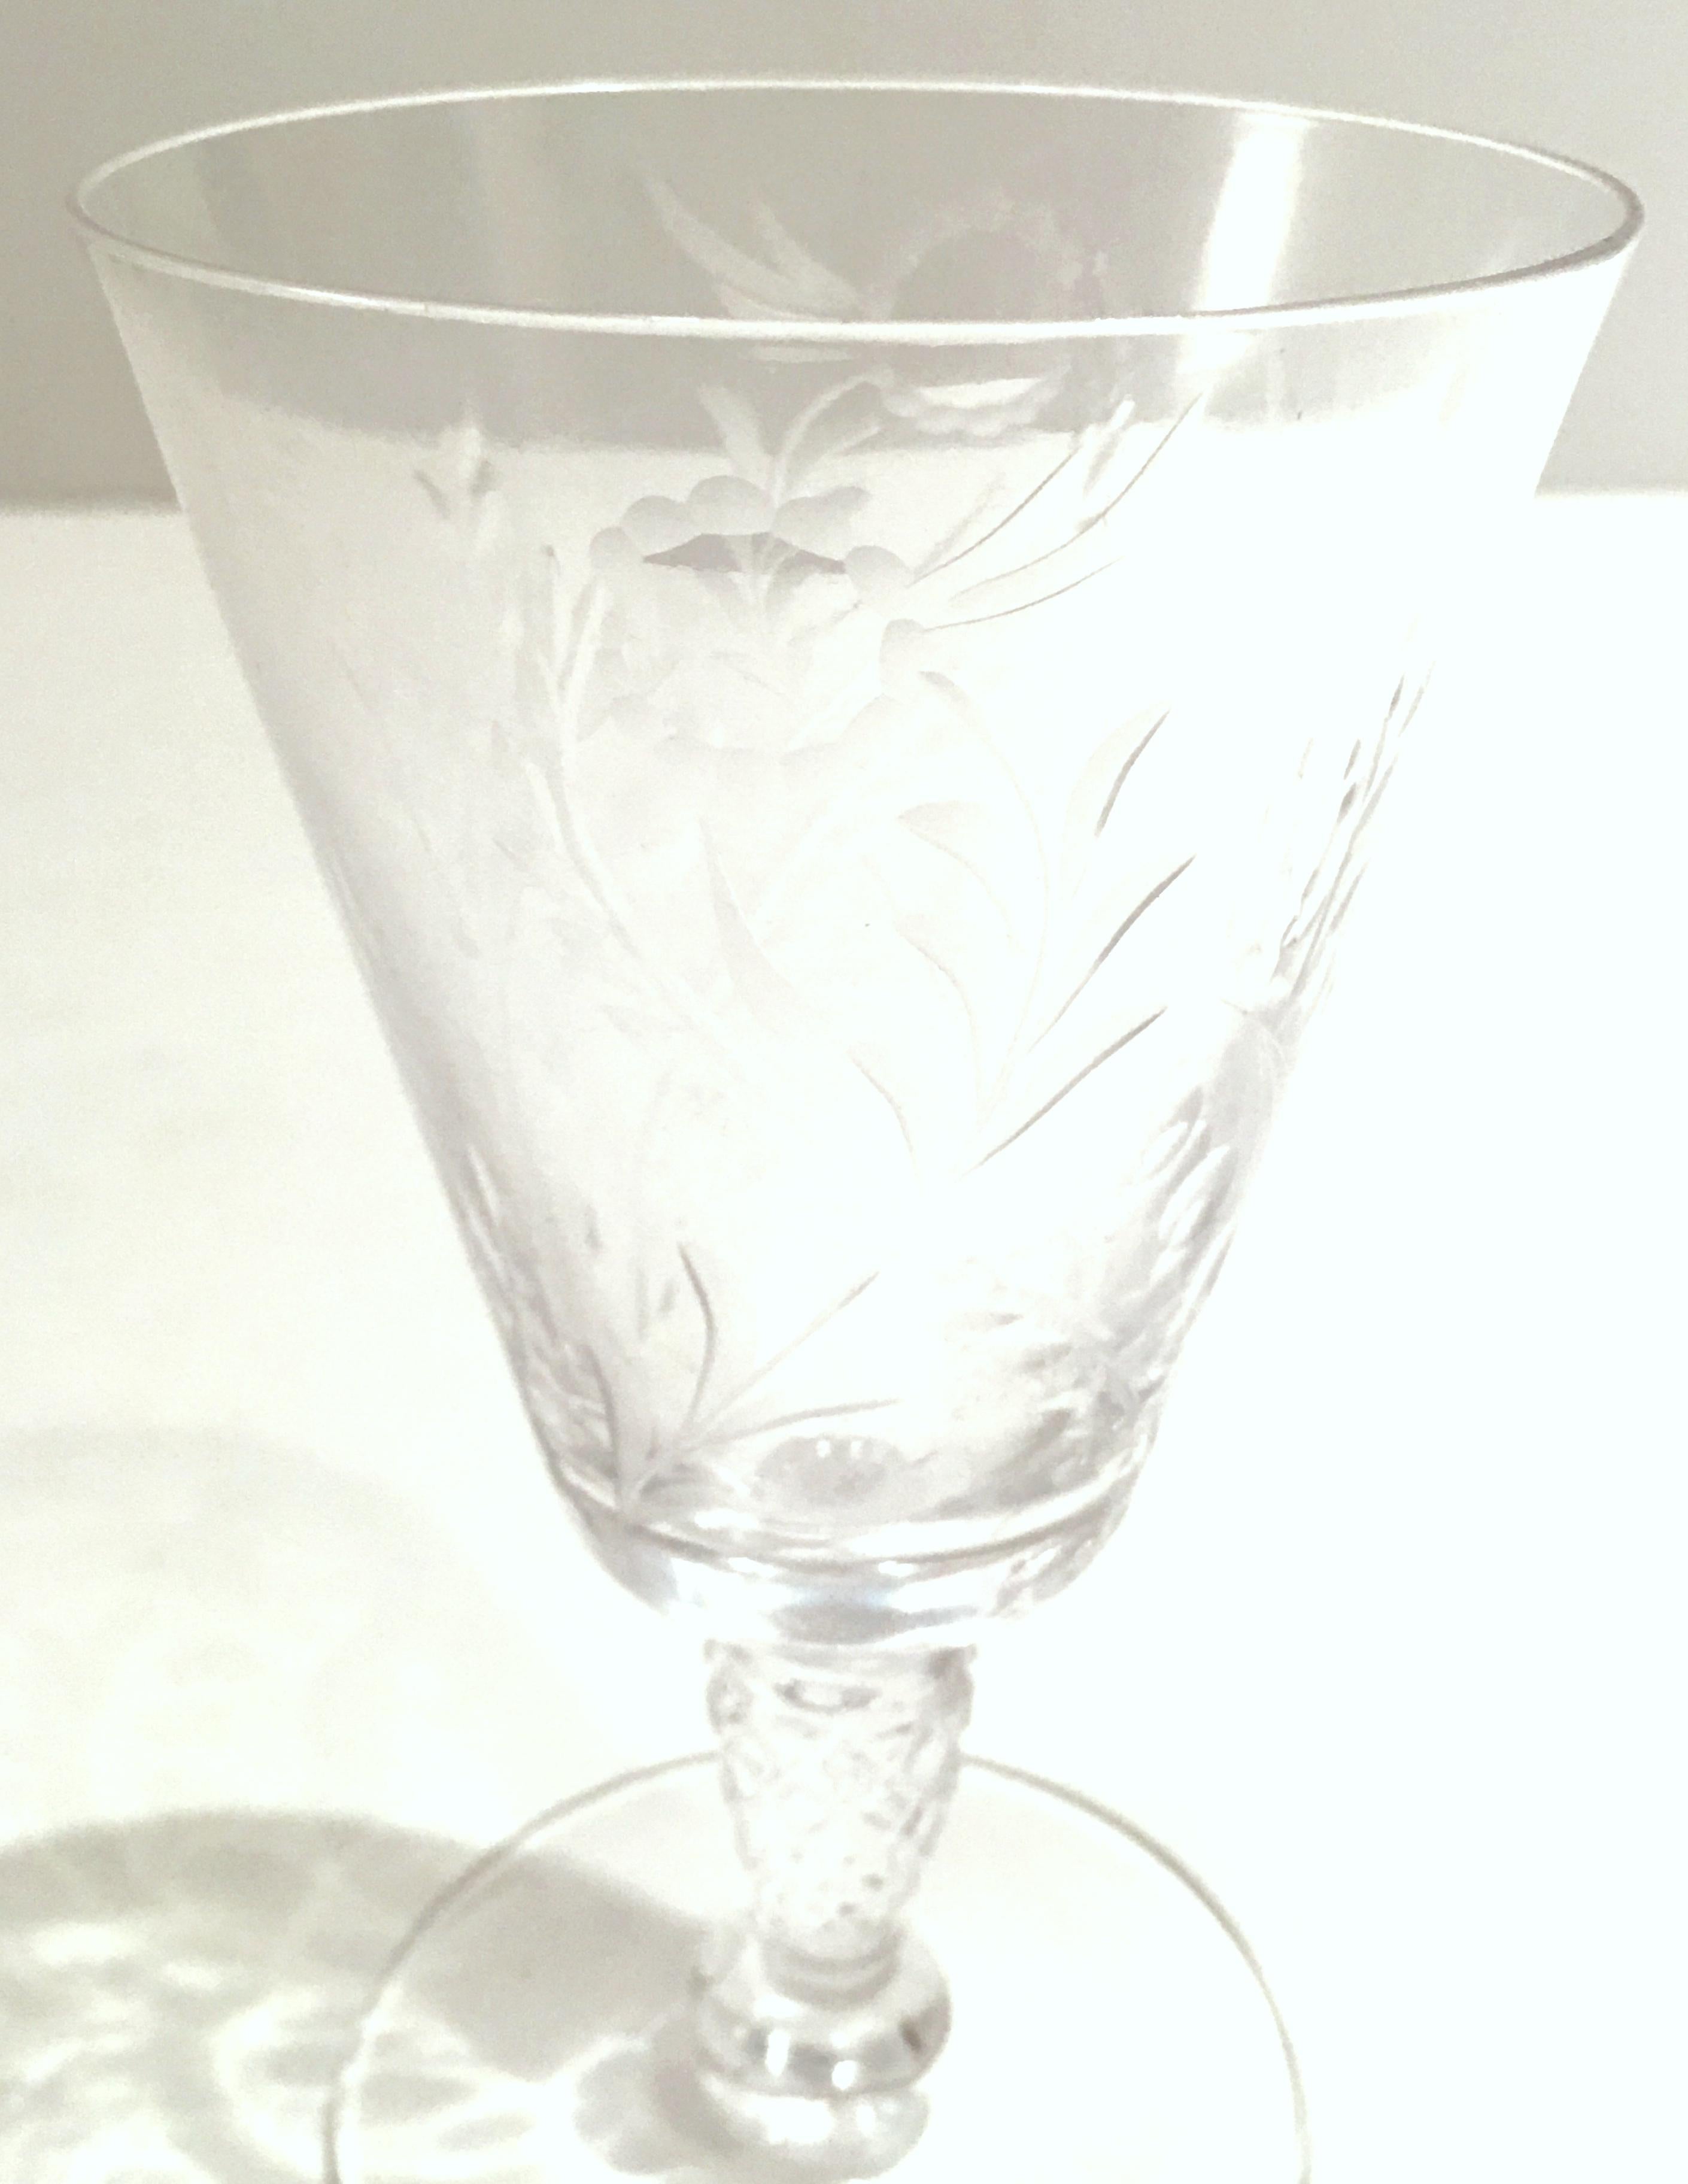 Mid-20th Century American Cut and Etched Crystal Stem Glasses S/8 For Sale 5